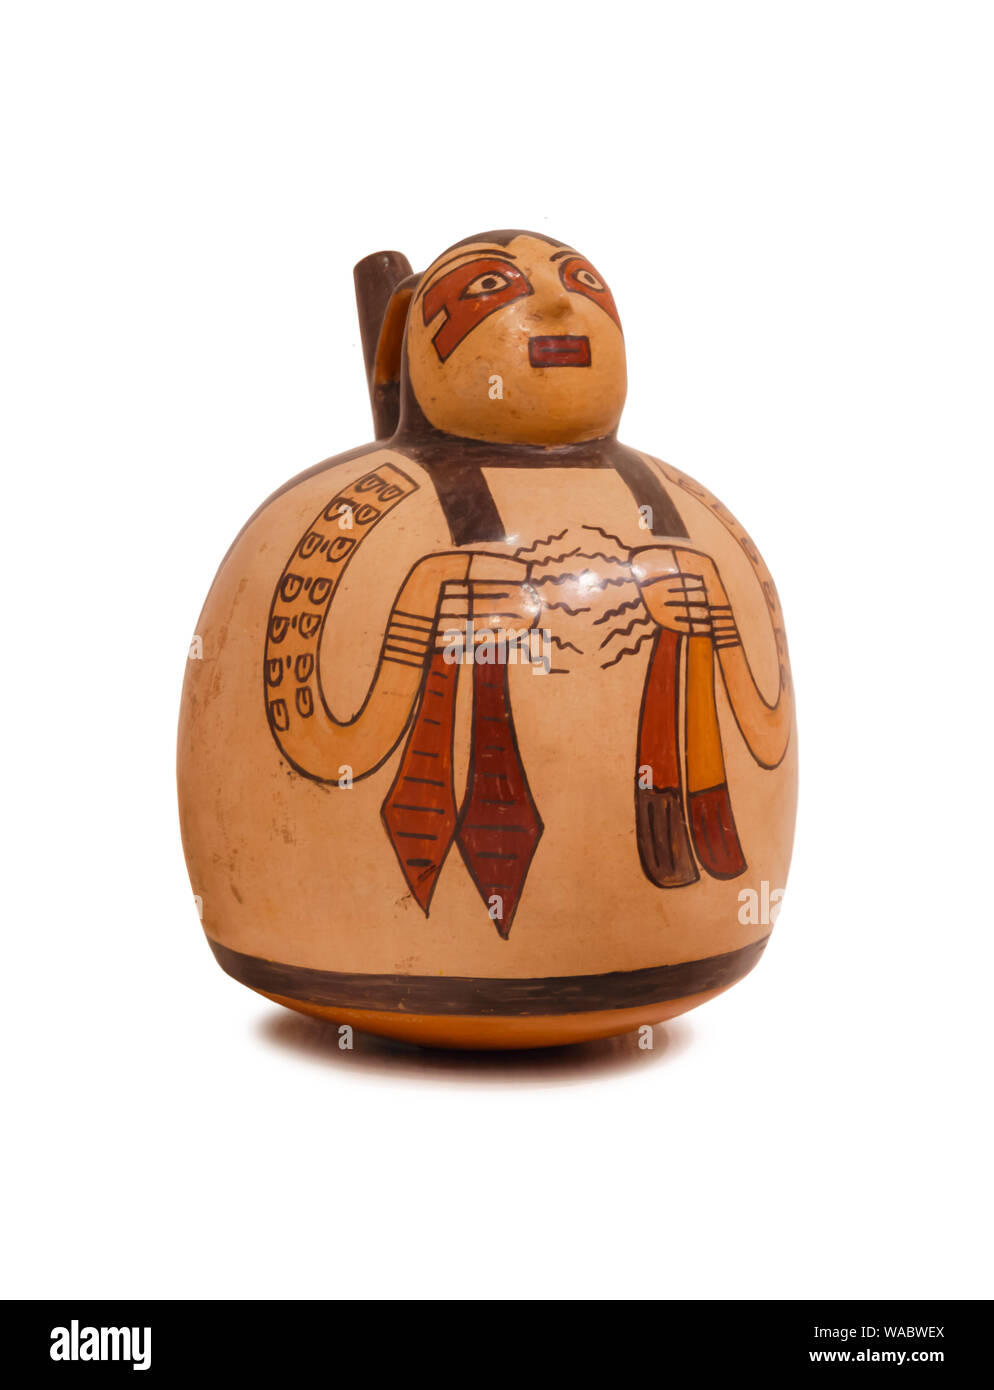 Yekaterinburg, Russia - January 17, 2019: ancient Peruvian ceramic vessel in the form of a shaman, Nazca culture, AD 200-300 Stock Photo